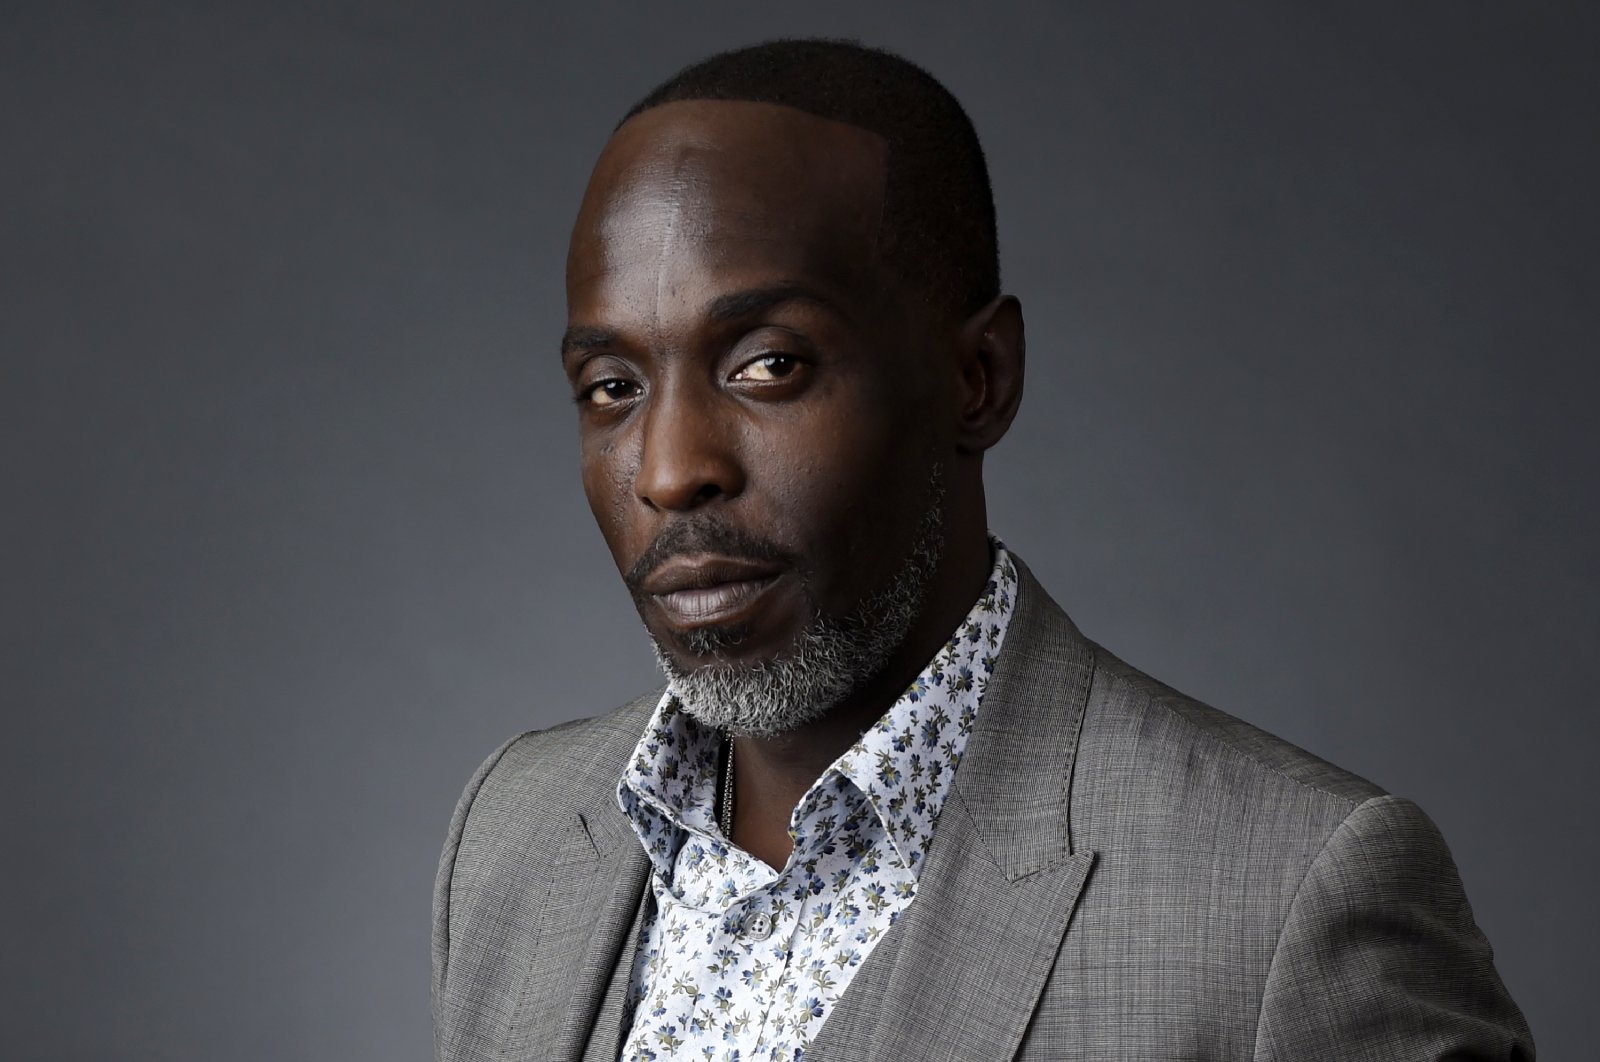 Actor Michael K. Williams poses for a portrait at the Beverly Hilton during the 2016 Television Critics Association Summer Press Tour, in California, U.S., July 30, 2016. (AP Photo)